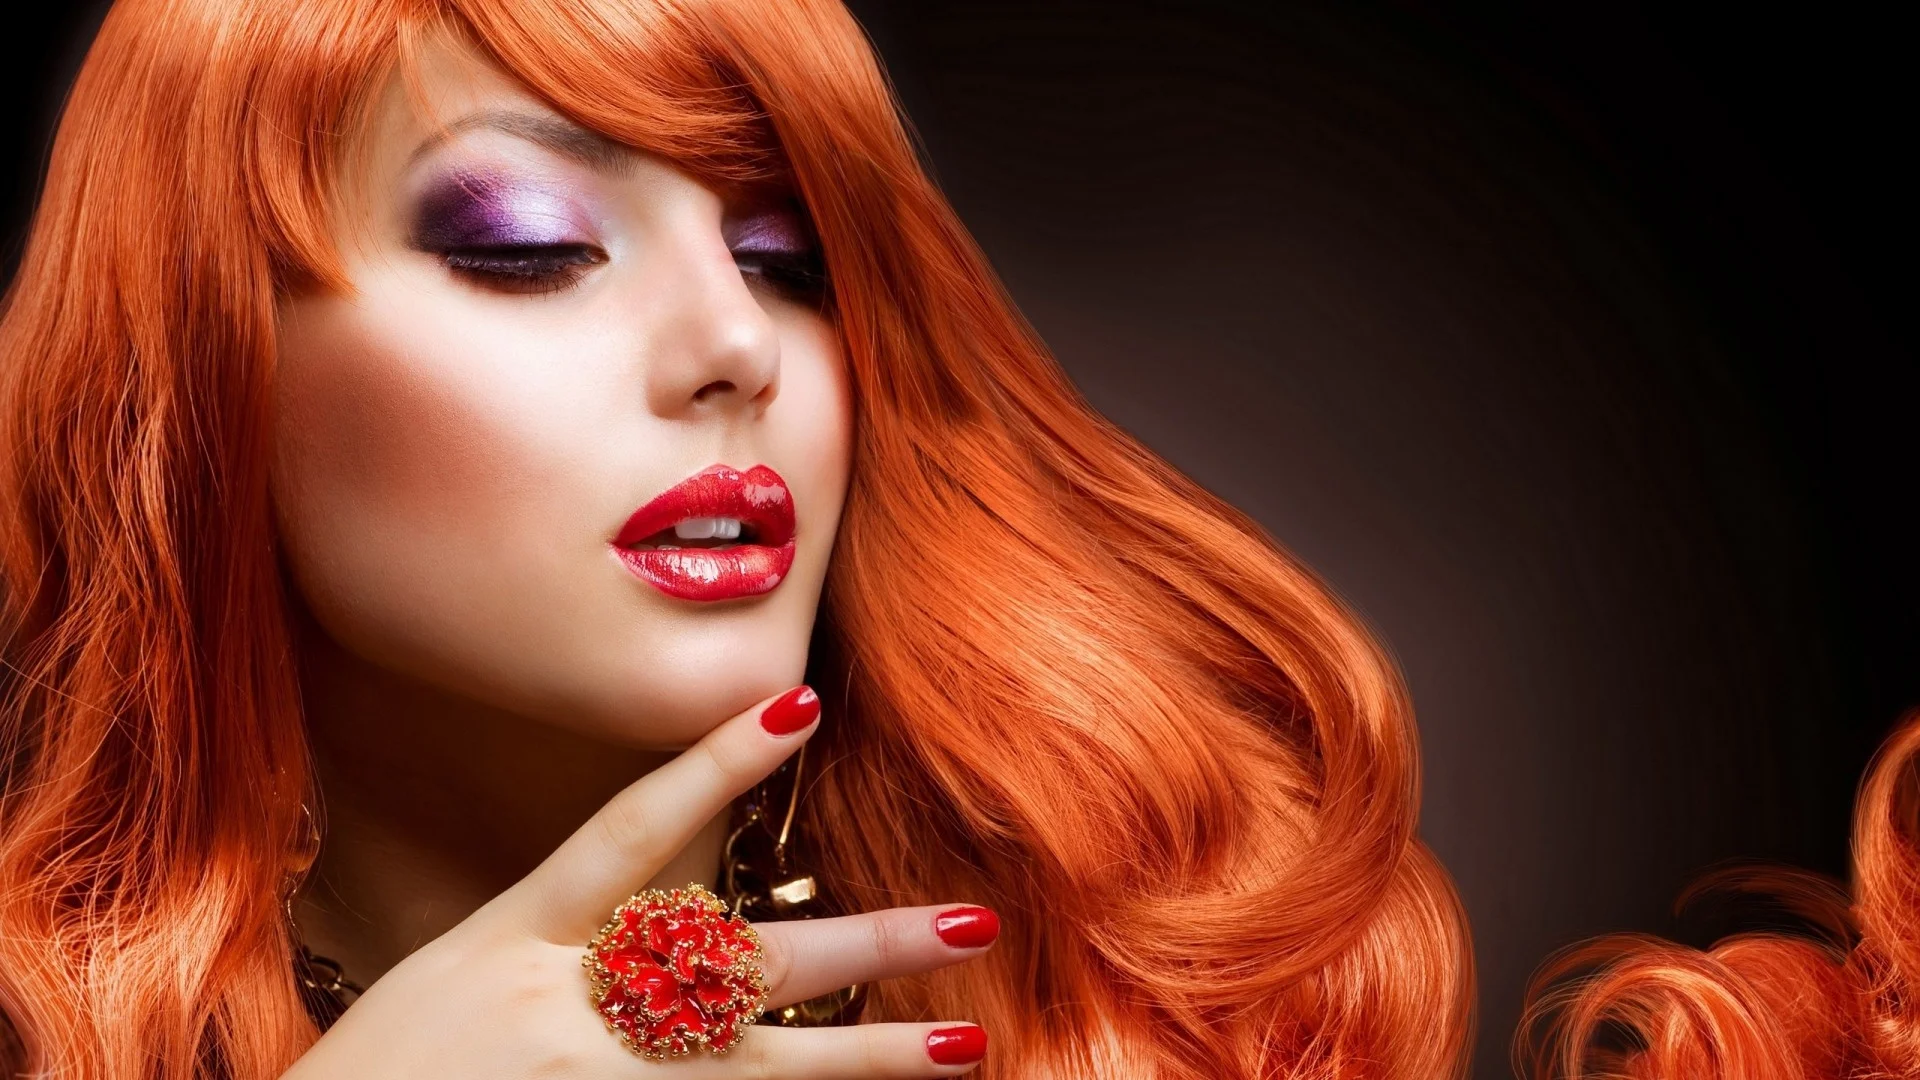 Preview wallpaper girl, red hair, makeup, manicure, face 1920×1080